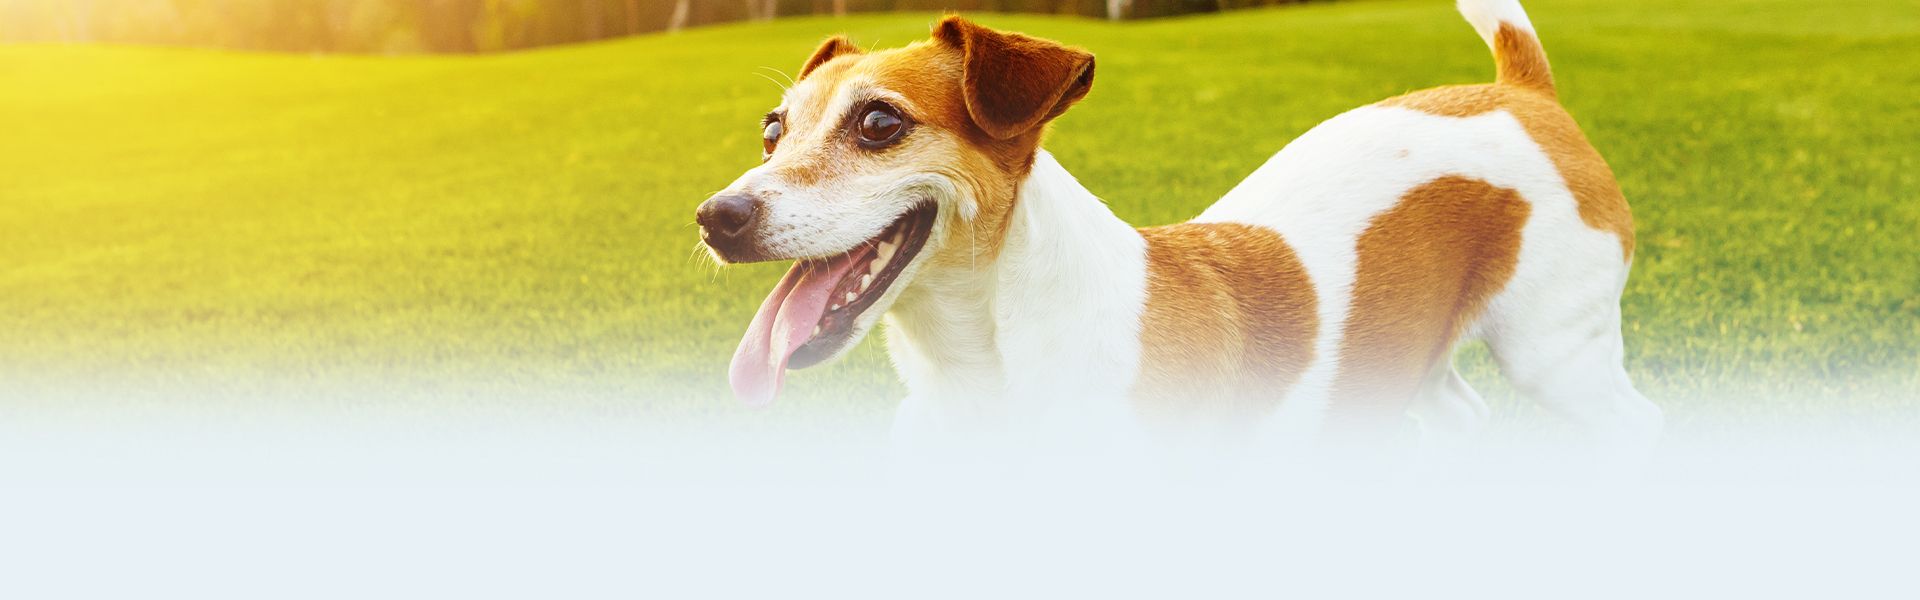 smiling jack russell dog on the green grass